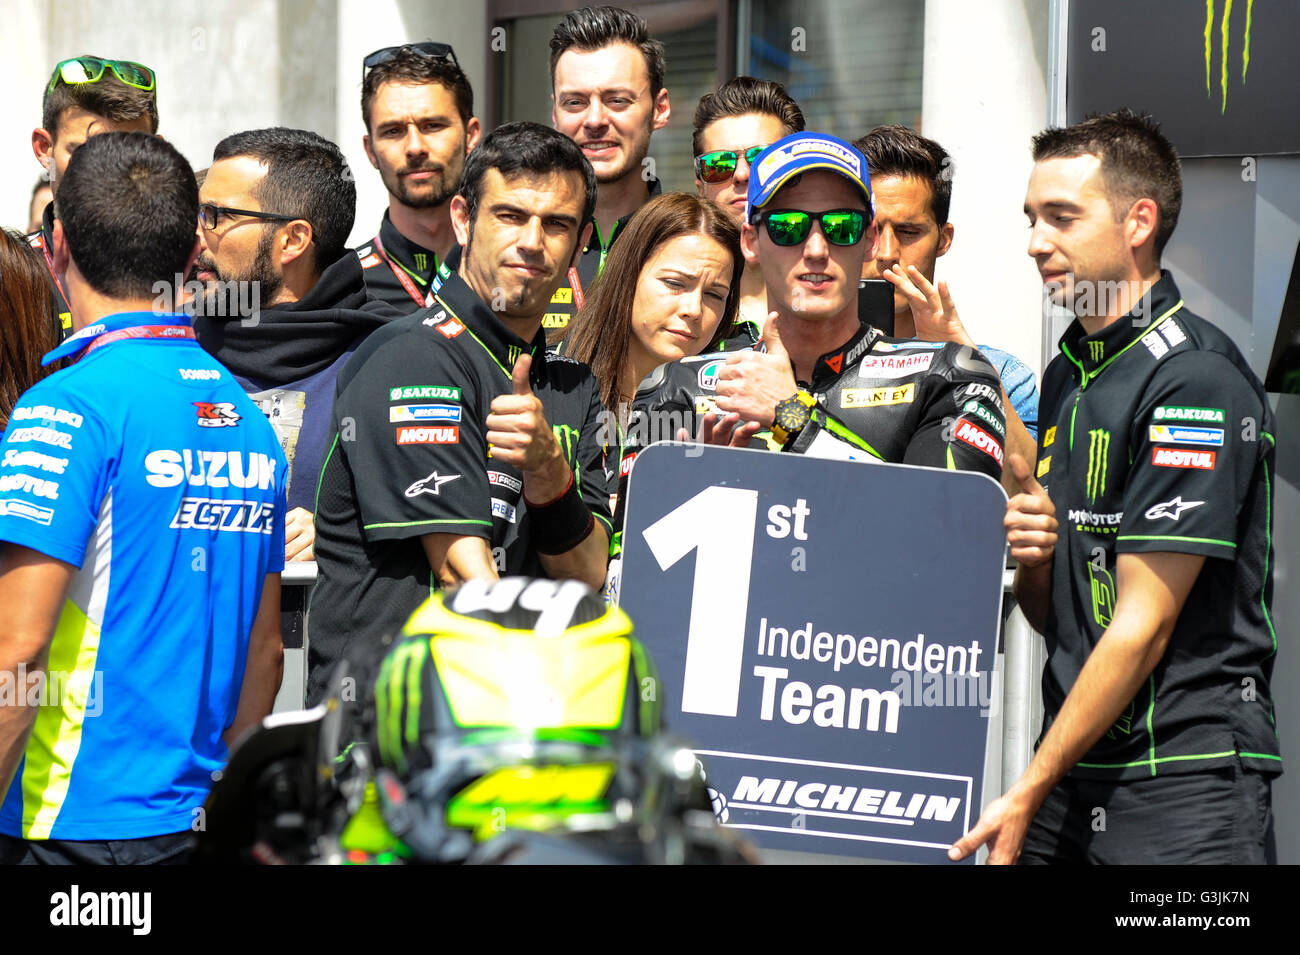 08.05.2016. Le Mans, France. MotoGP  race day.Pol Espargaro (Monster Yamaha Tech3). (Photo by Gaetano Piazzolla / Pacific Press) Stock Photo